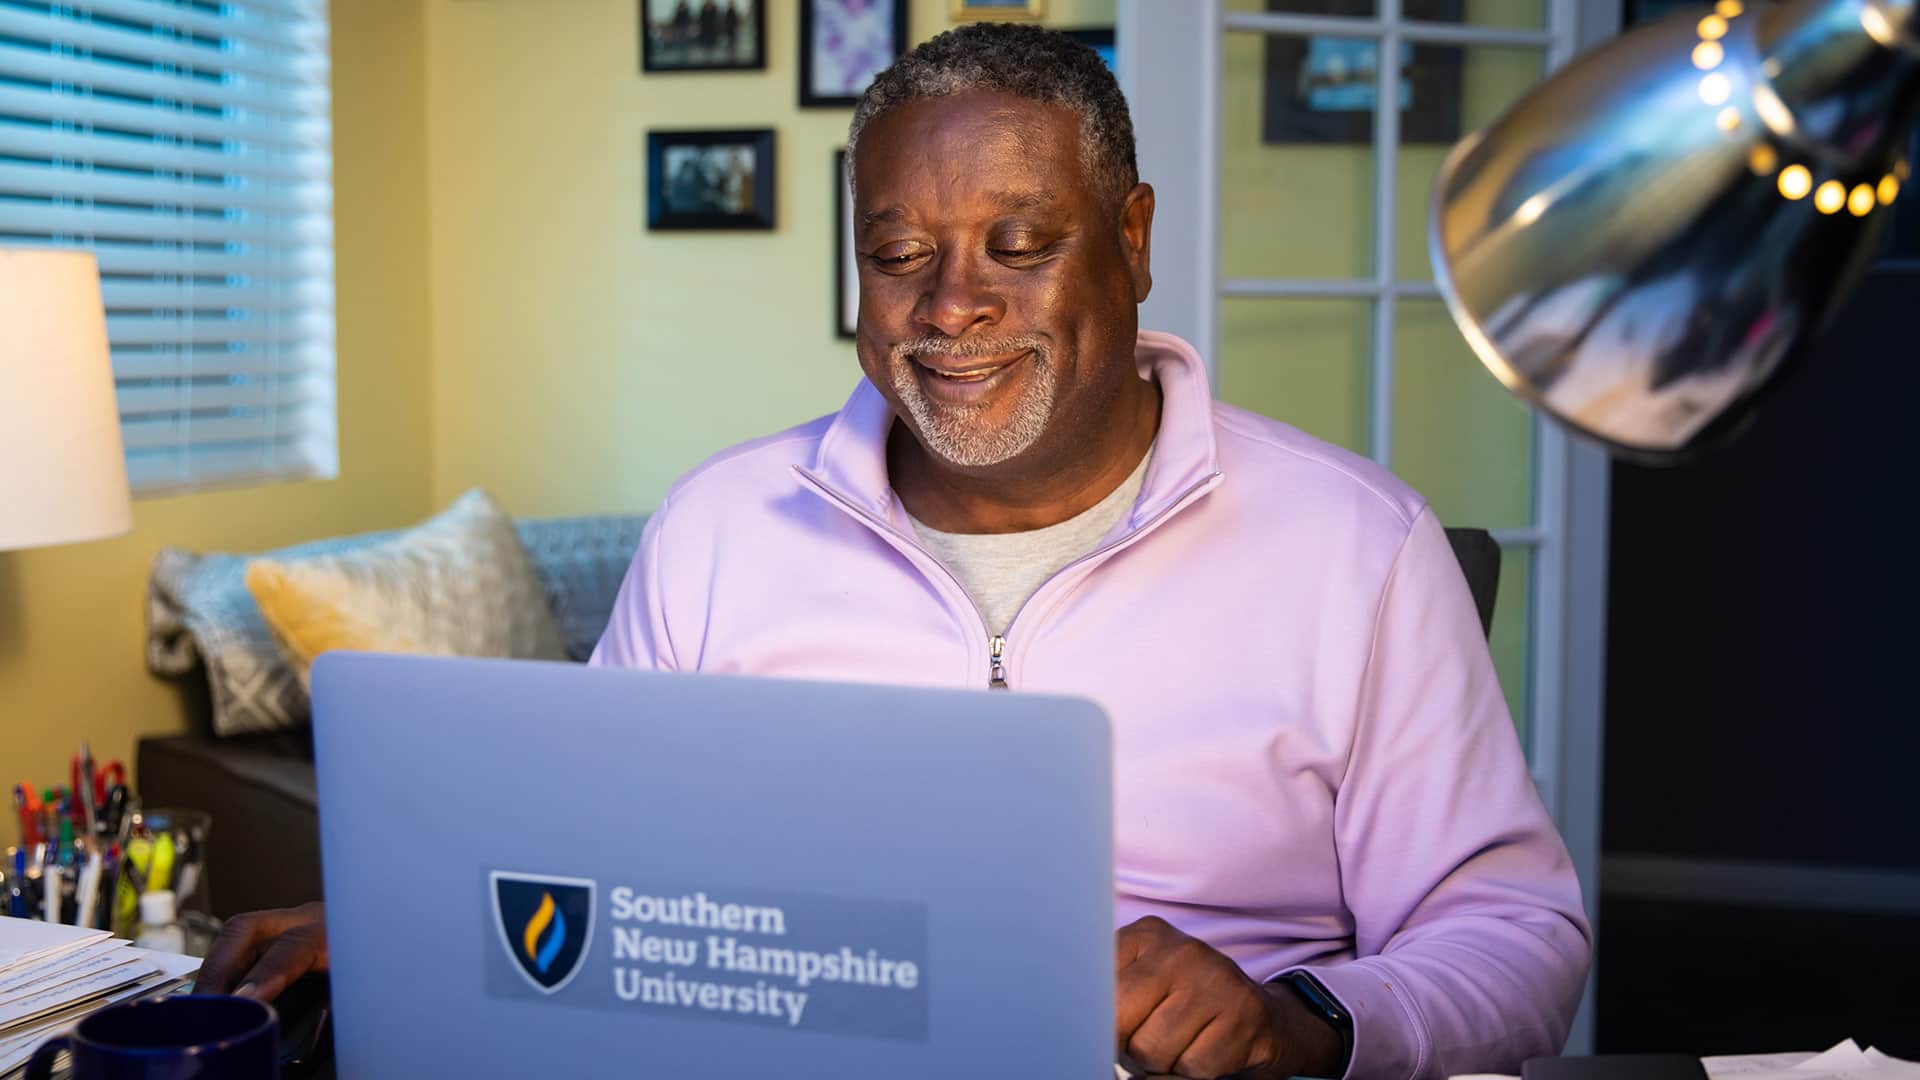 Corey Dantzler, who earned his degree from SNHU in 2023, in his home office working on his laptop with a Southern New Hampshire University sticker on the front.